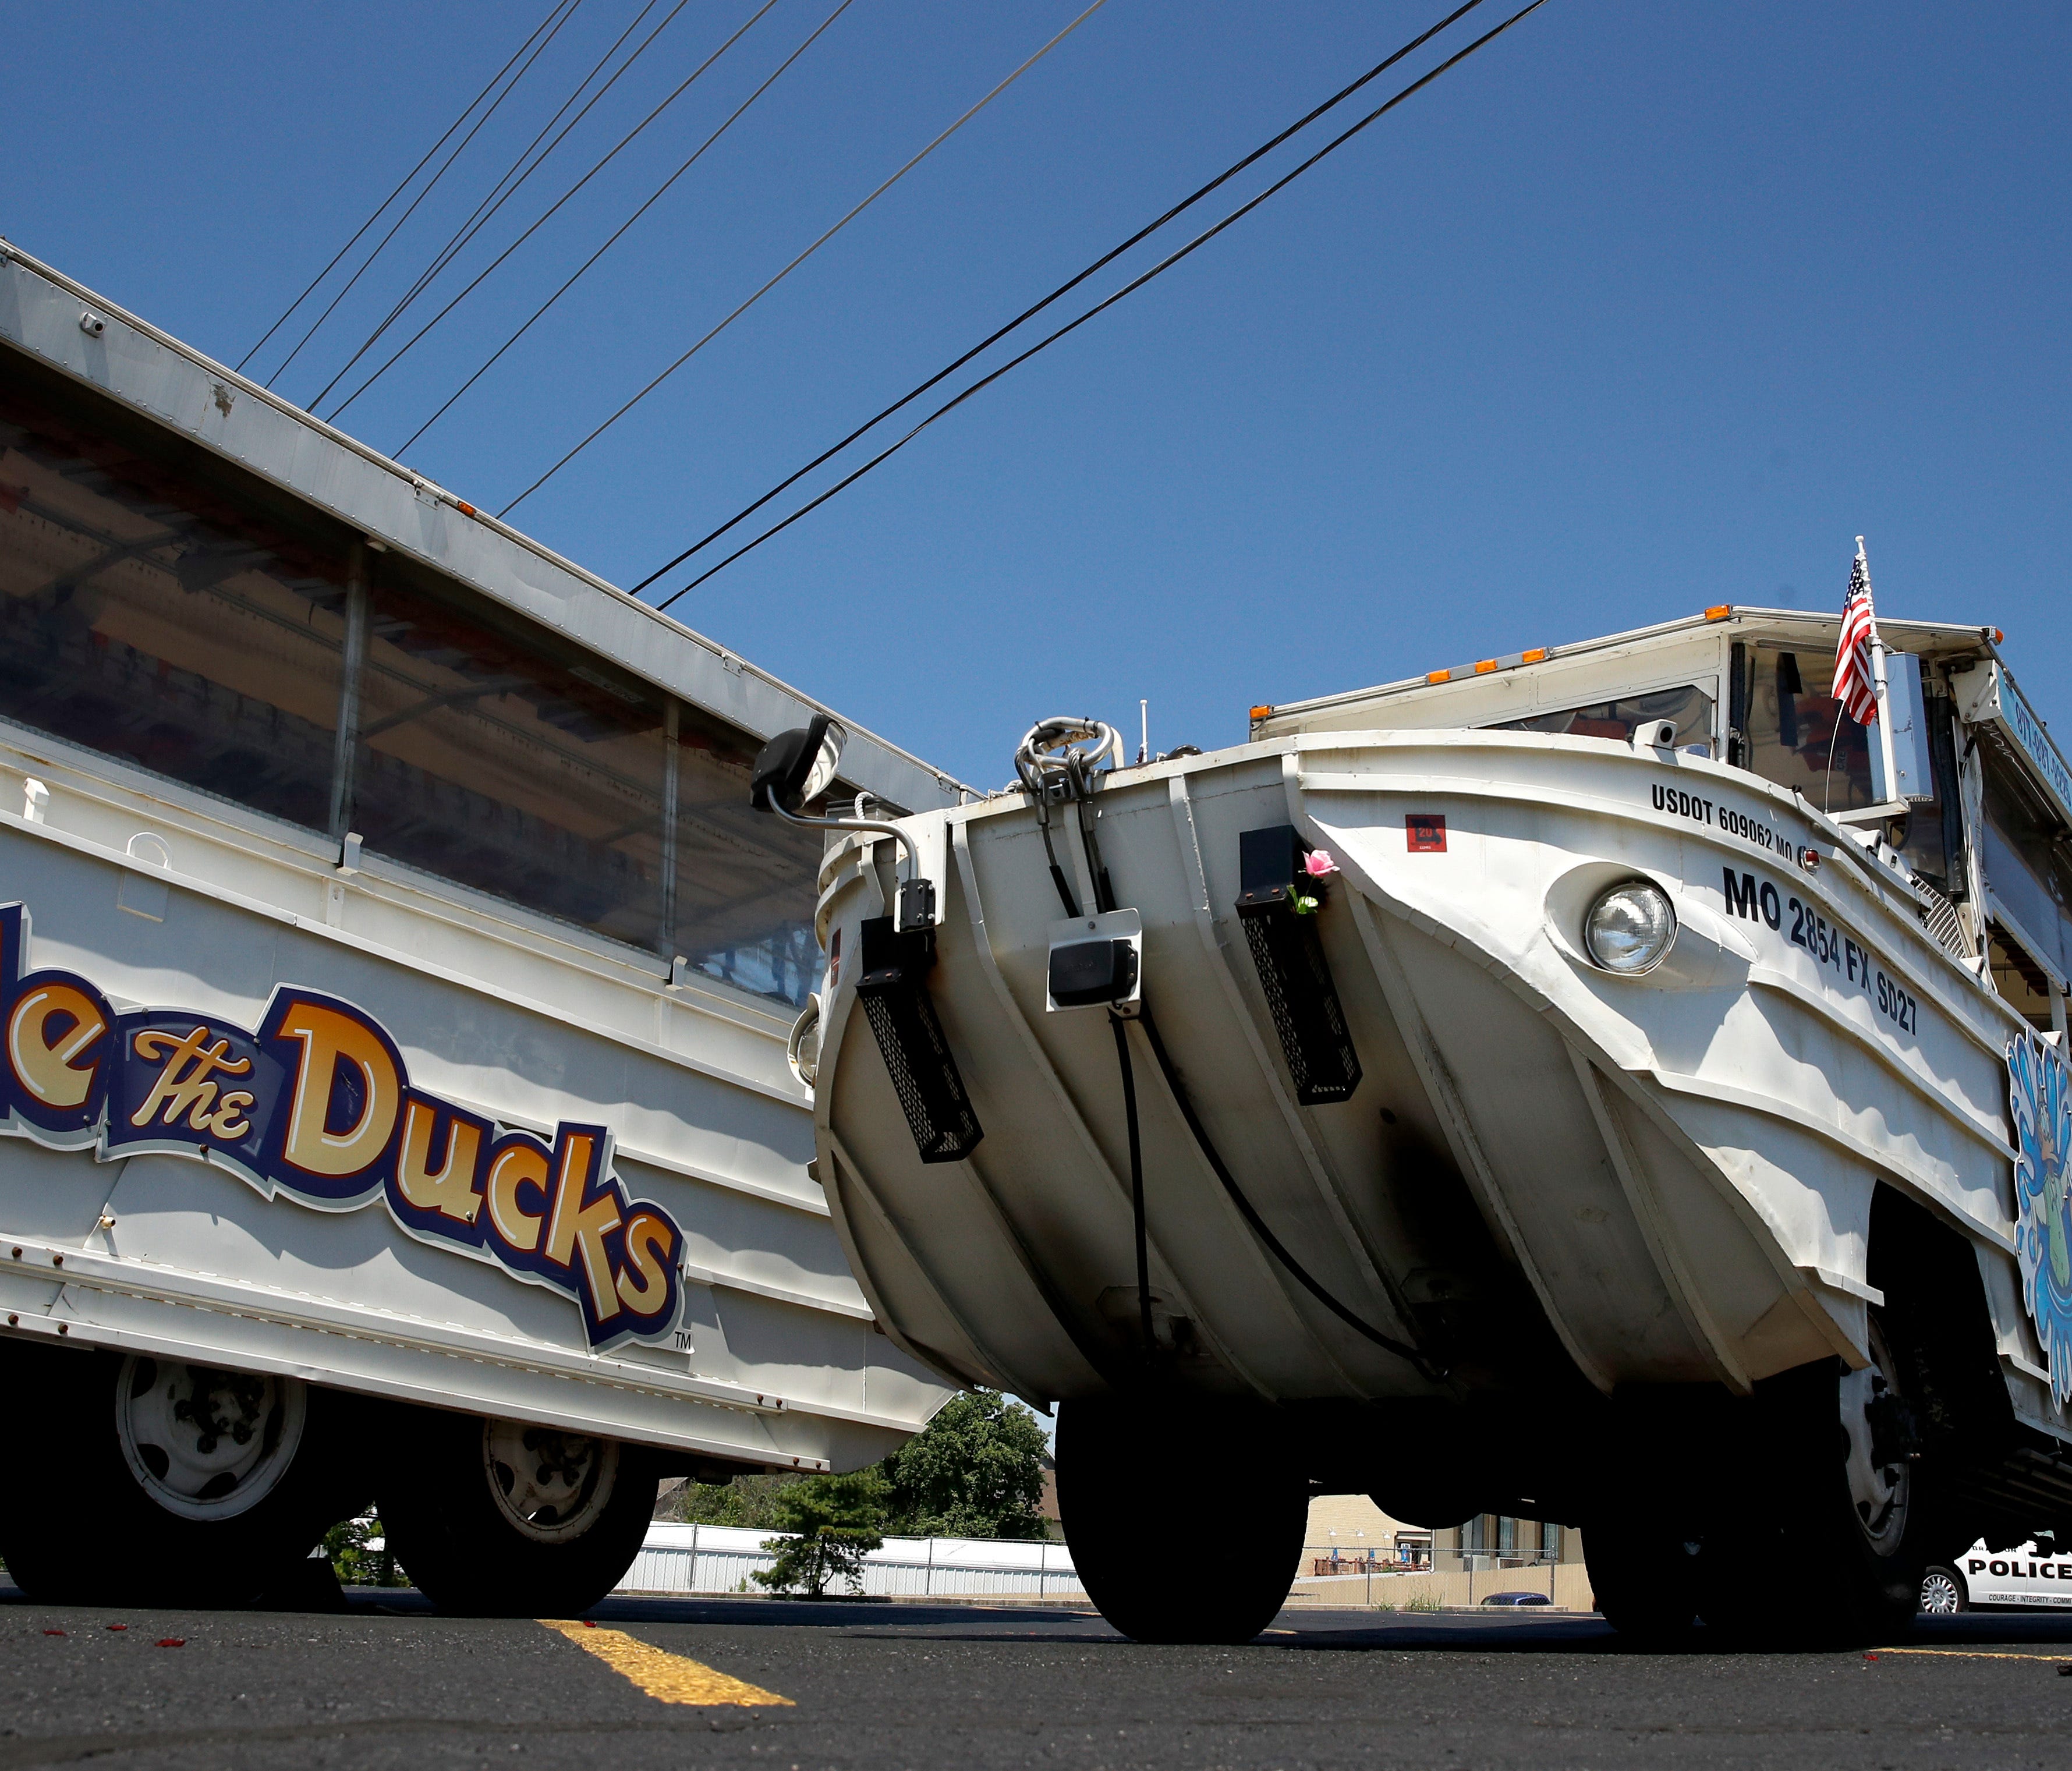 A man looks at an idled duck boat in the parking lot of Ride the Ducks in Branson, Mo.